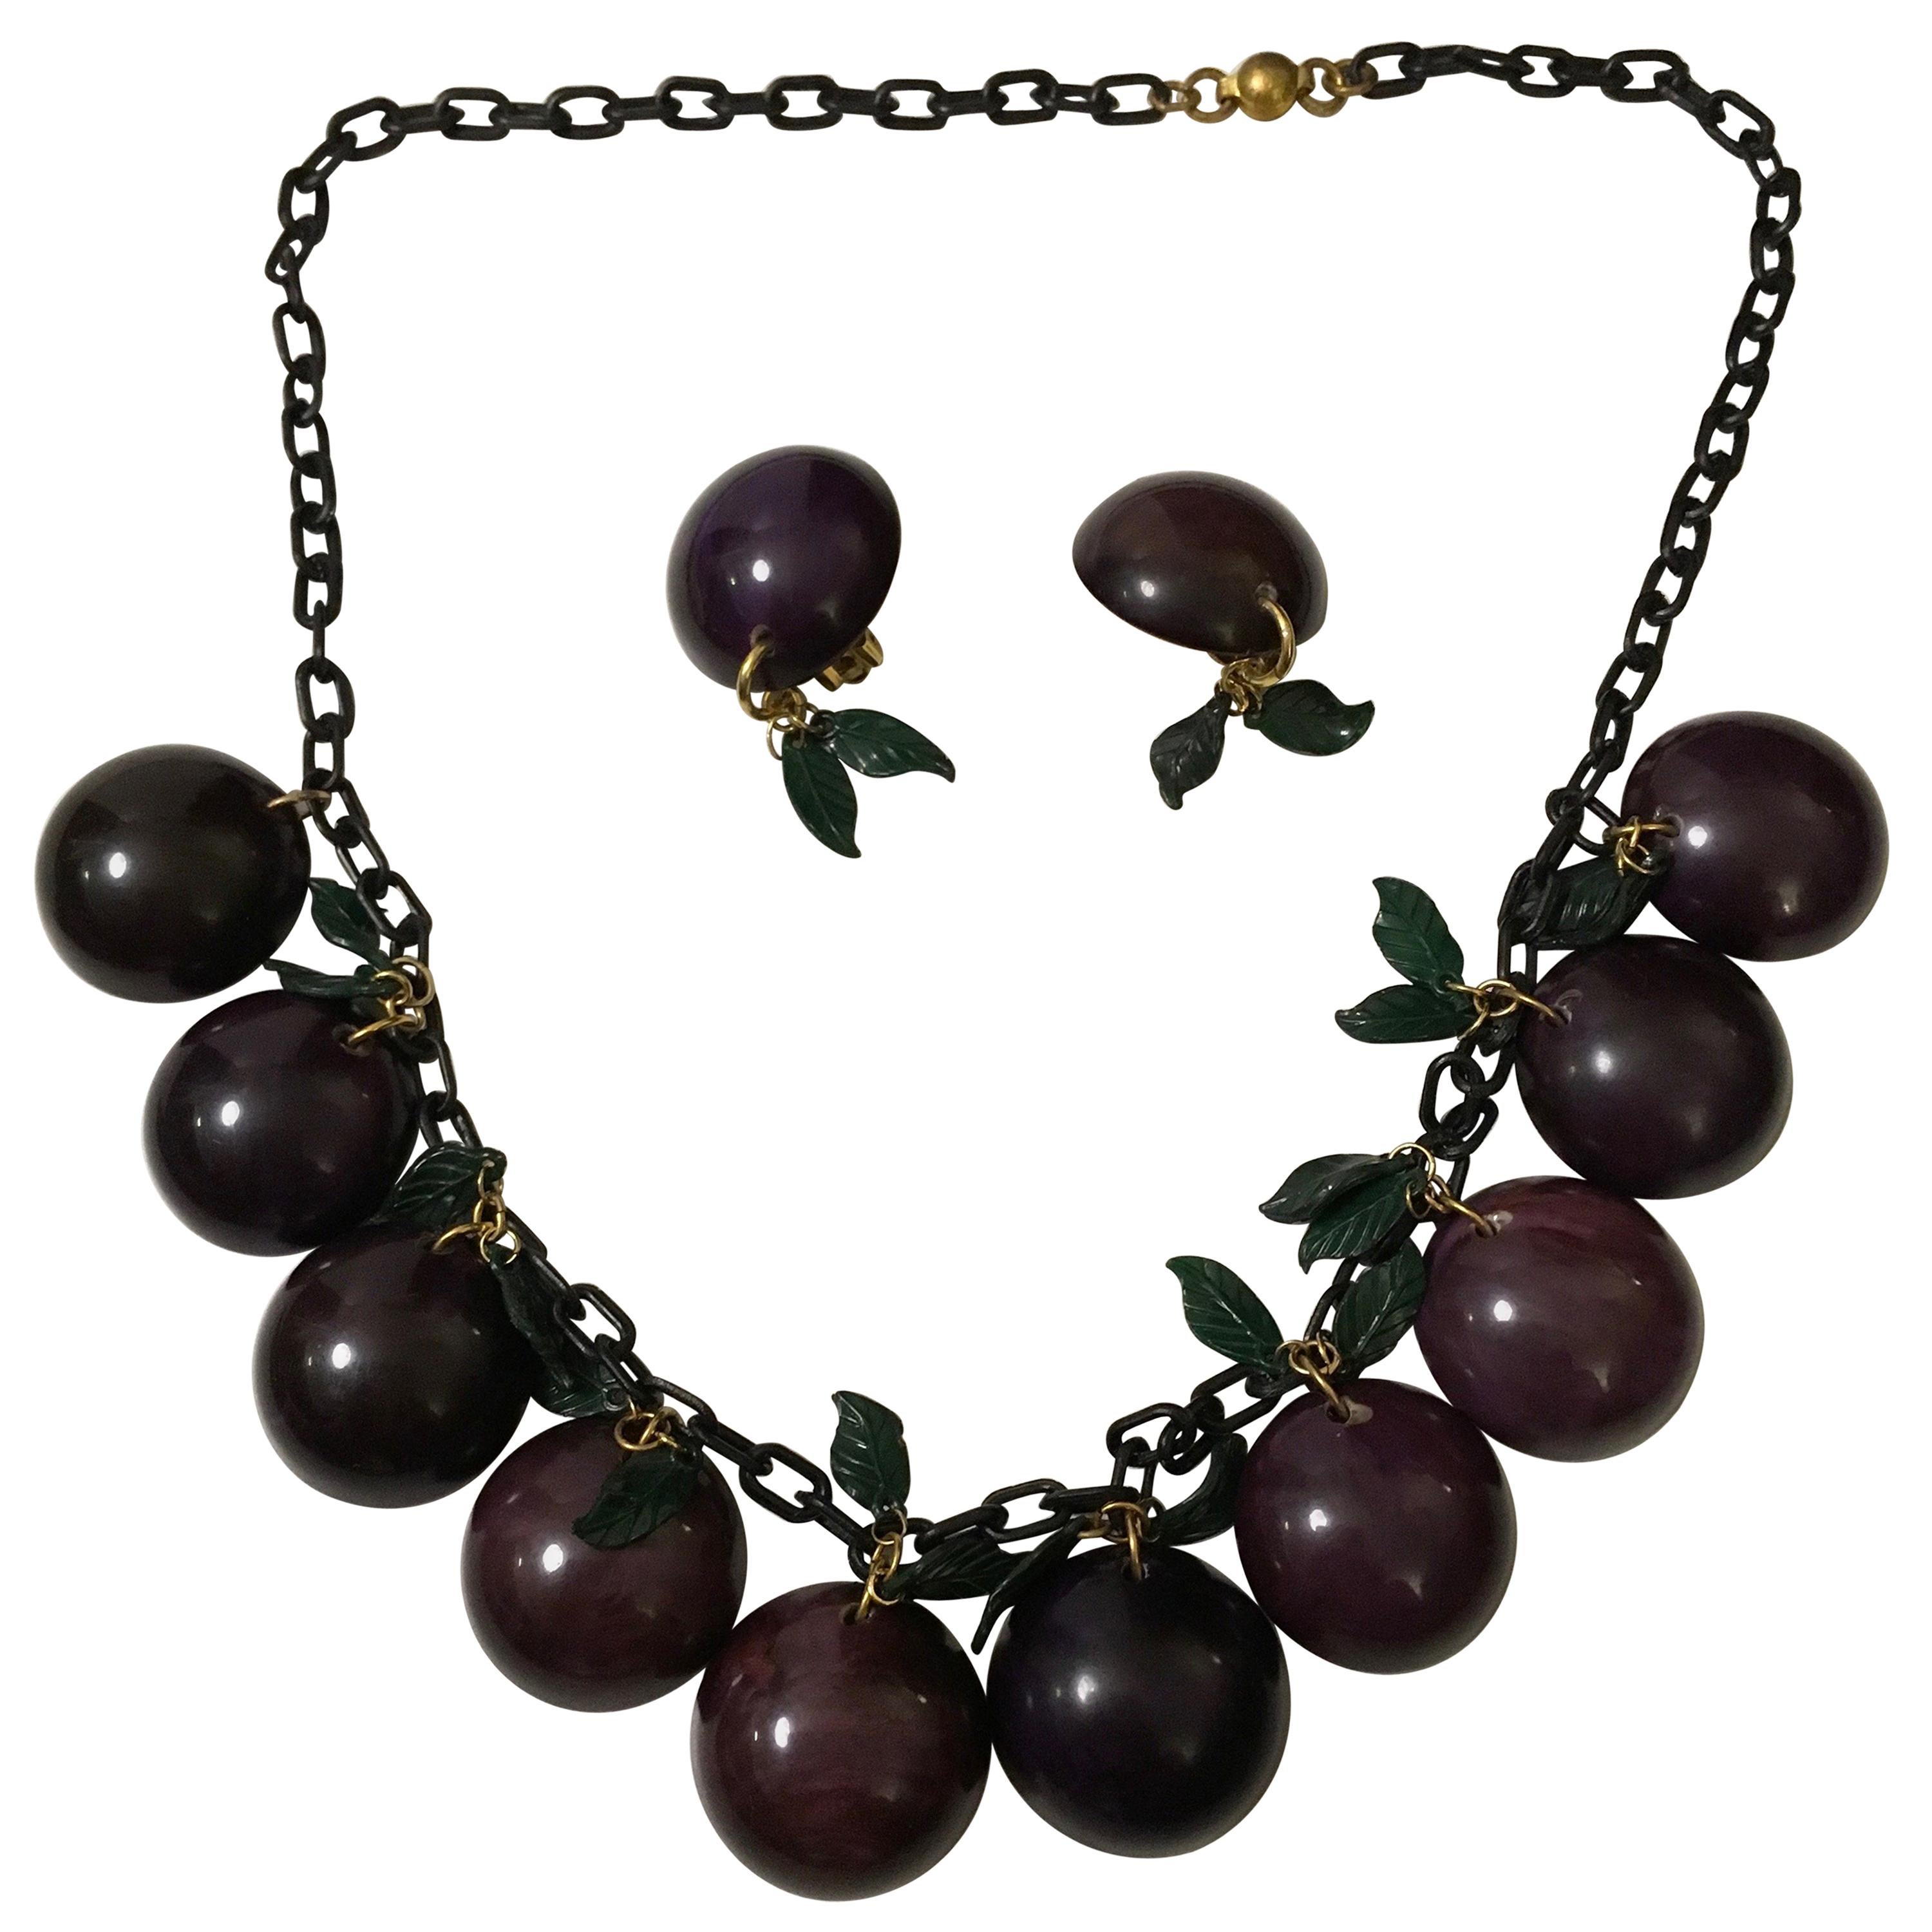  Bakelite Necklace Grape with Matching Earrings Jan Carlin For Sale